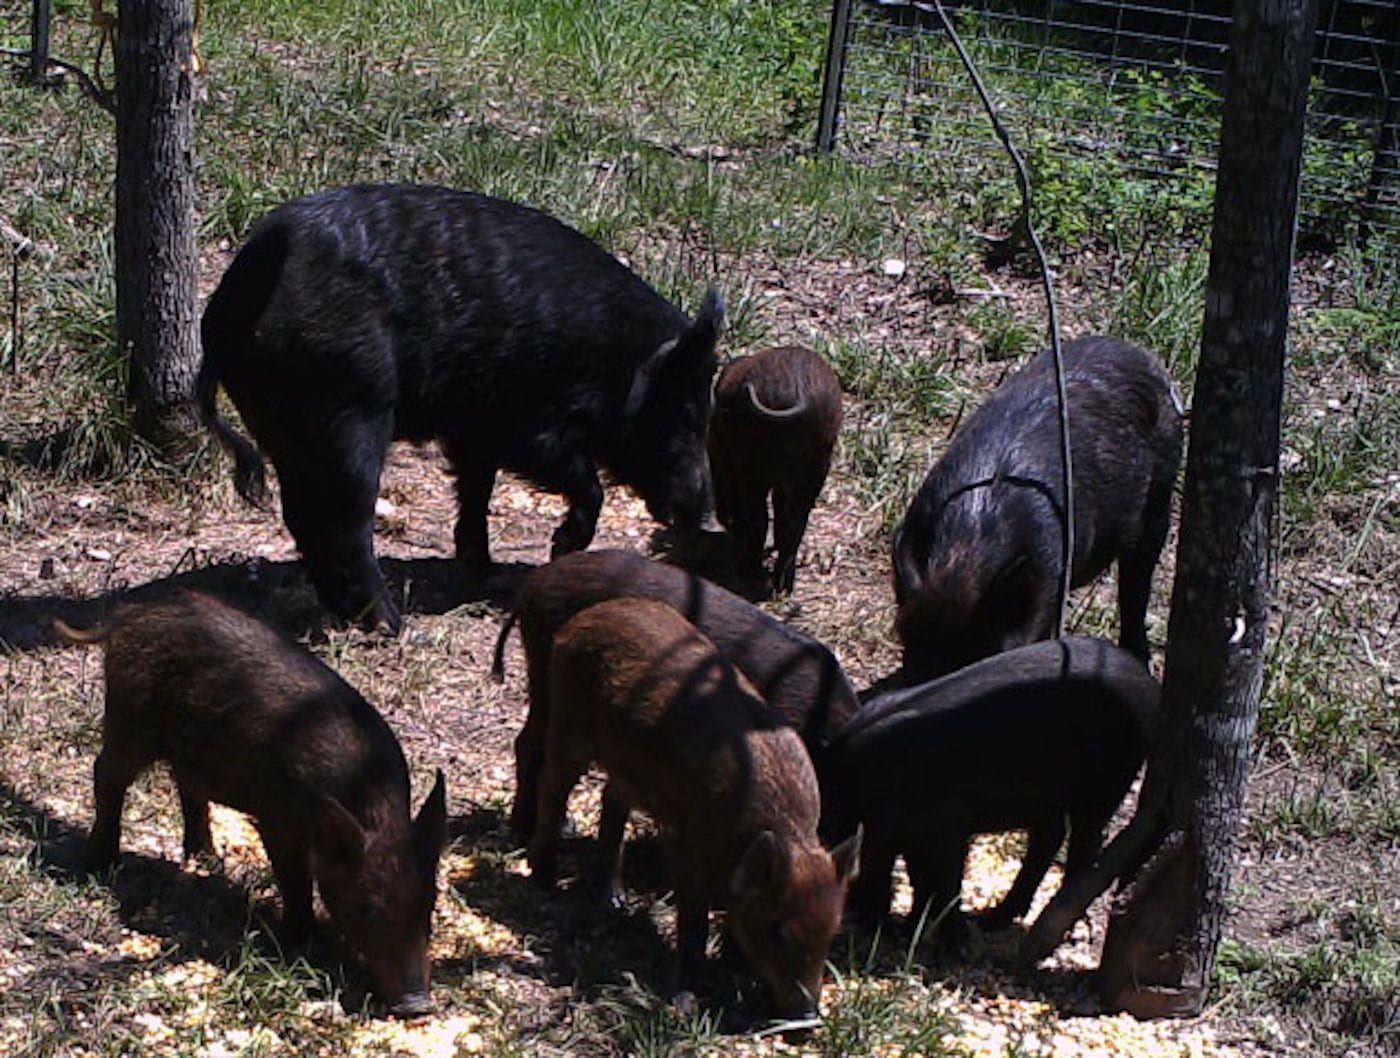 DAMAGE SURVEY — Feral hogs, an invasive species, threaten native species like turkey and deer. A recent survey by the Arkansas Forest Resources Center estimates economic damages from feral hogs. (Courtesy Becky McPeake)